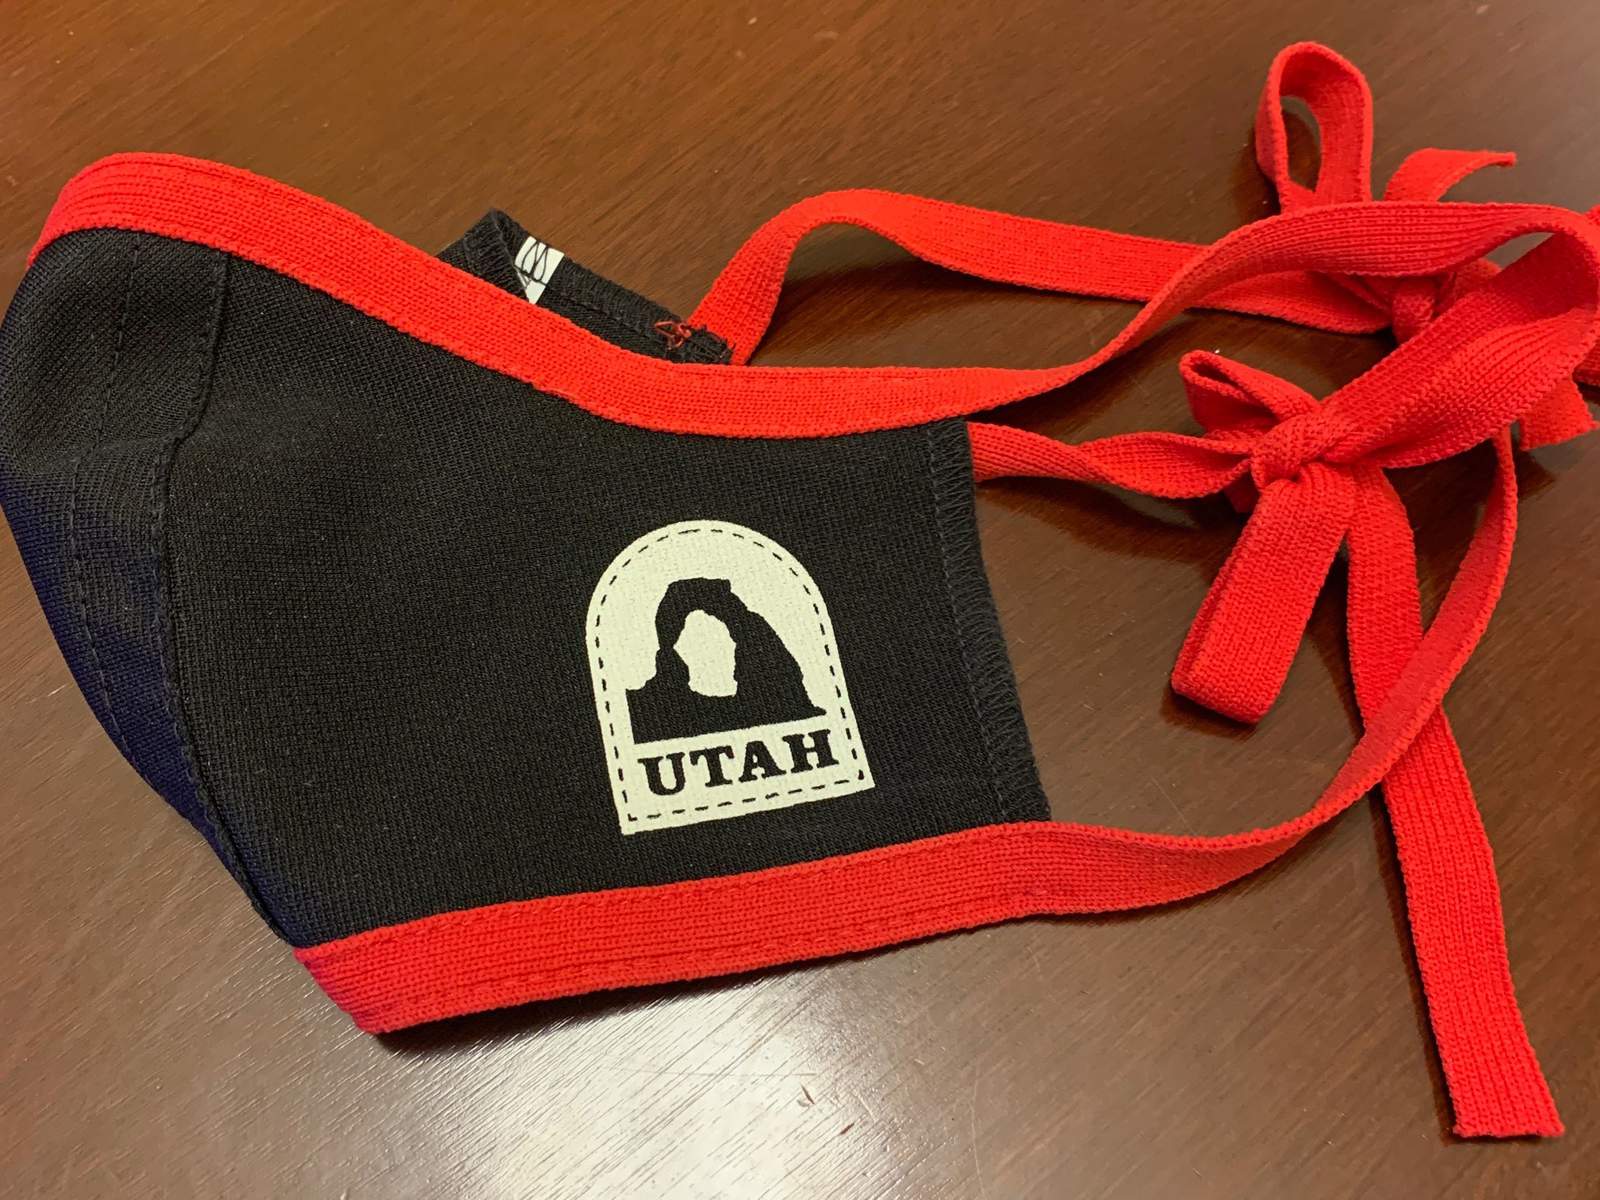 The state of Utah will provide a free face mask to any resident who requests one